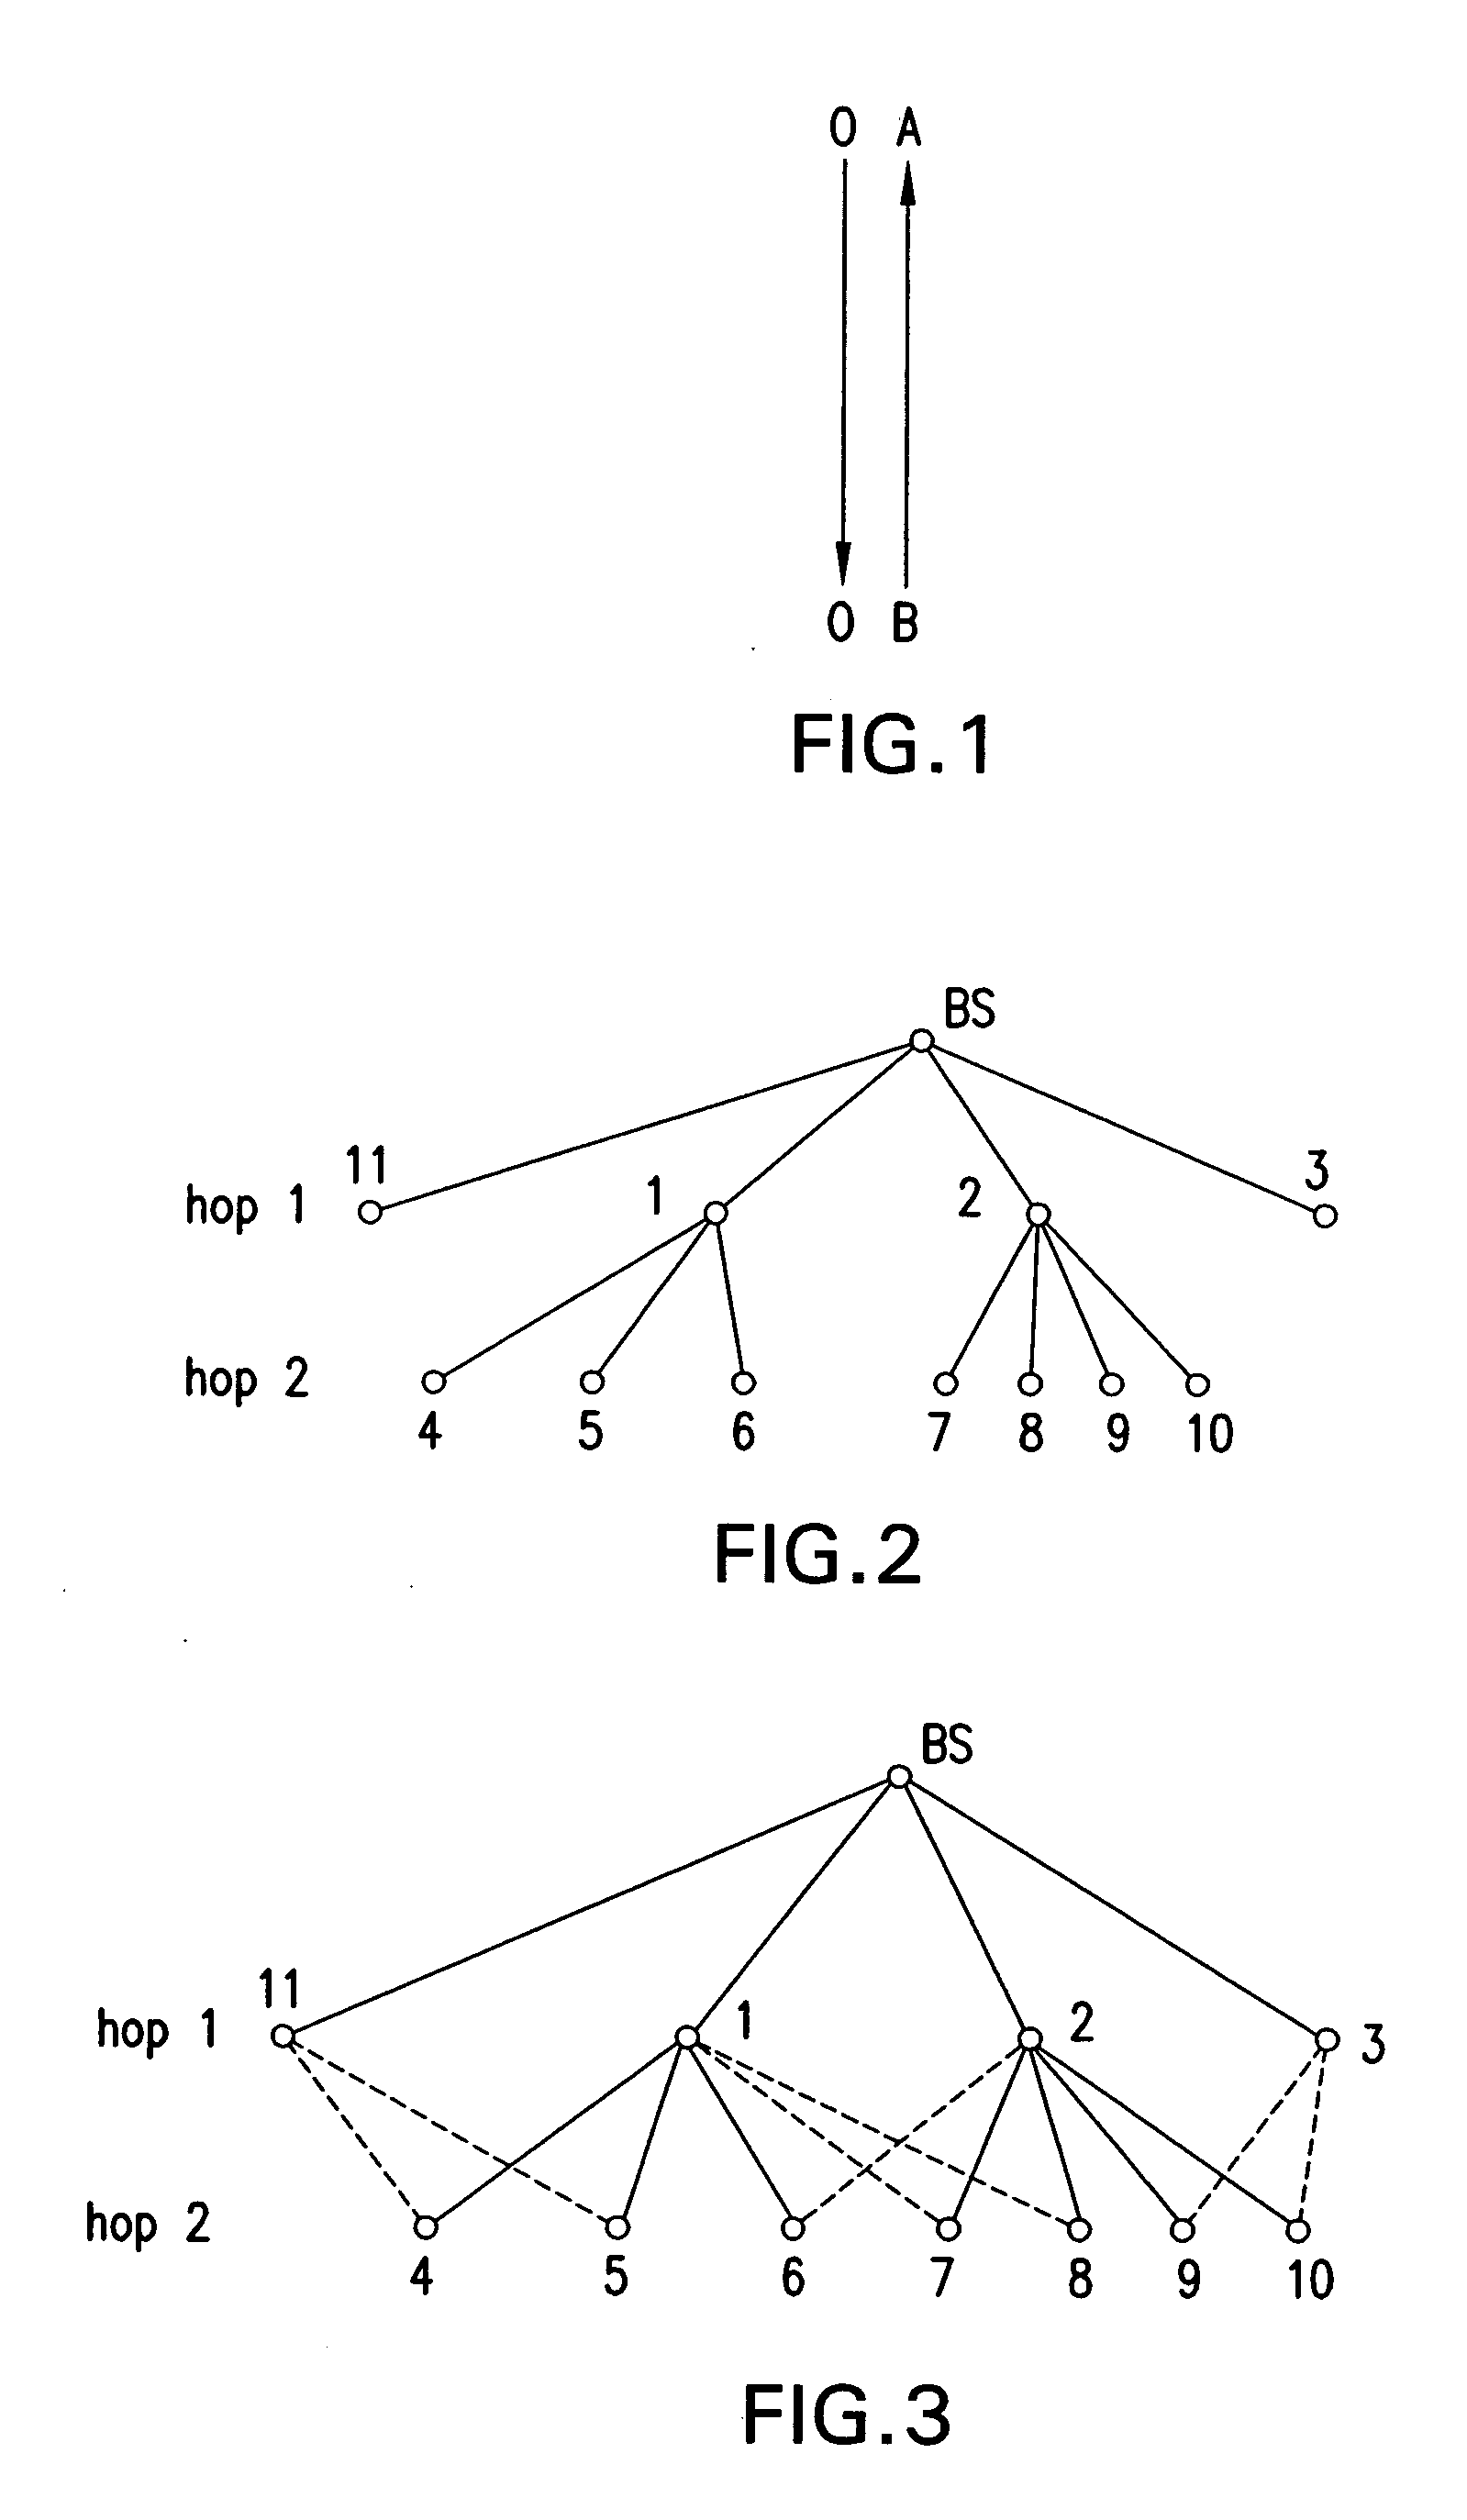 Method and system for providing reliable communication with redundancy for energy constrained wireless systems